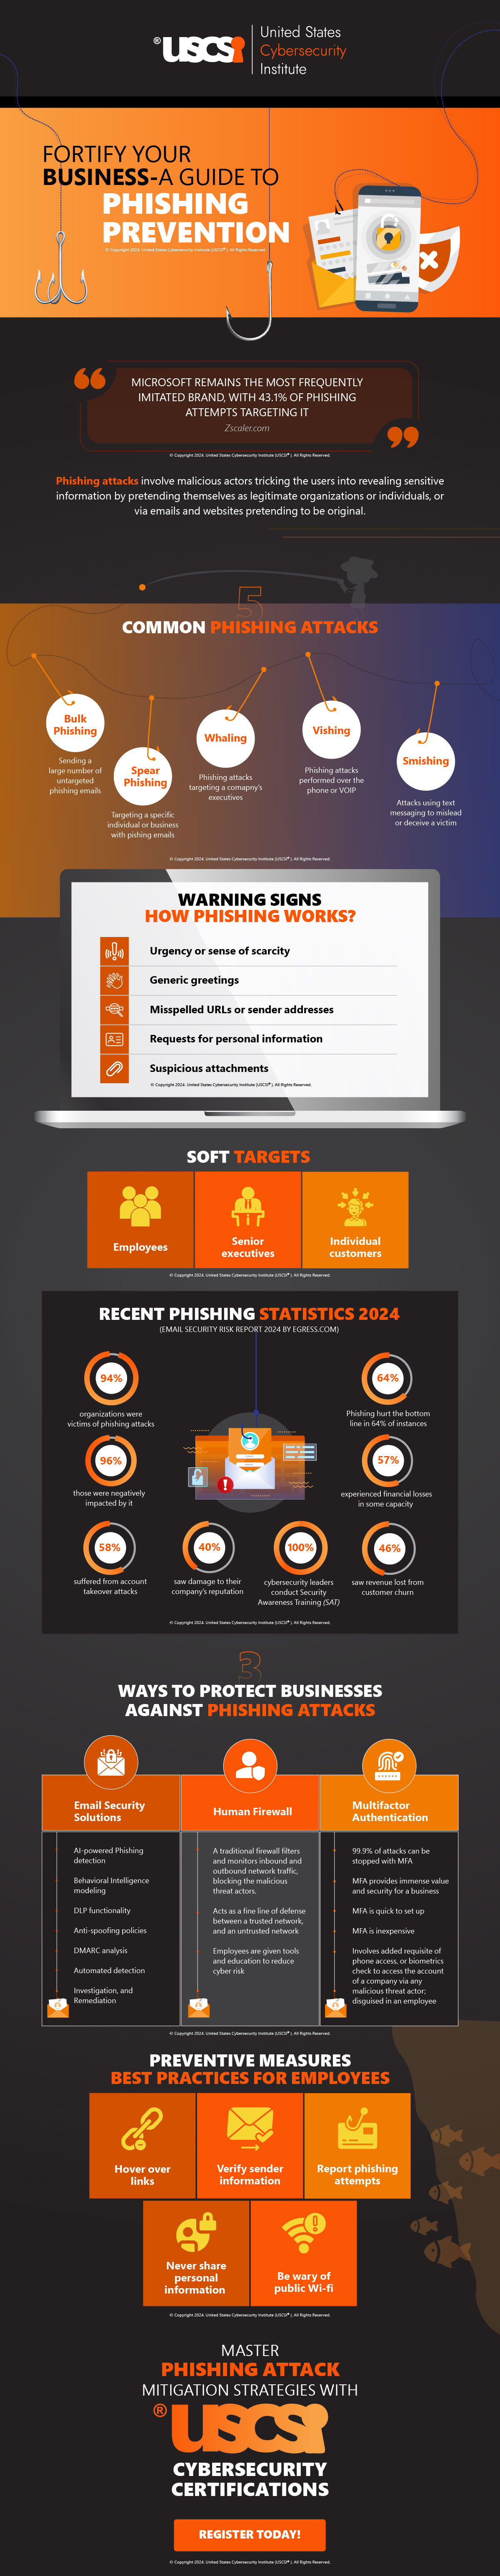 Fortify Your Business - A Guide To Phishing Prevention